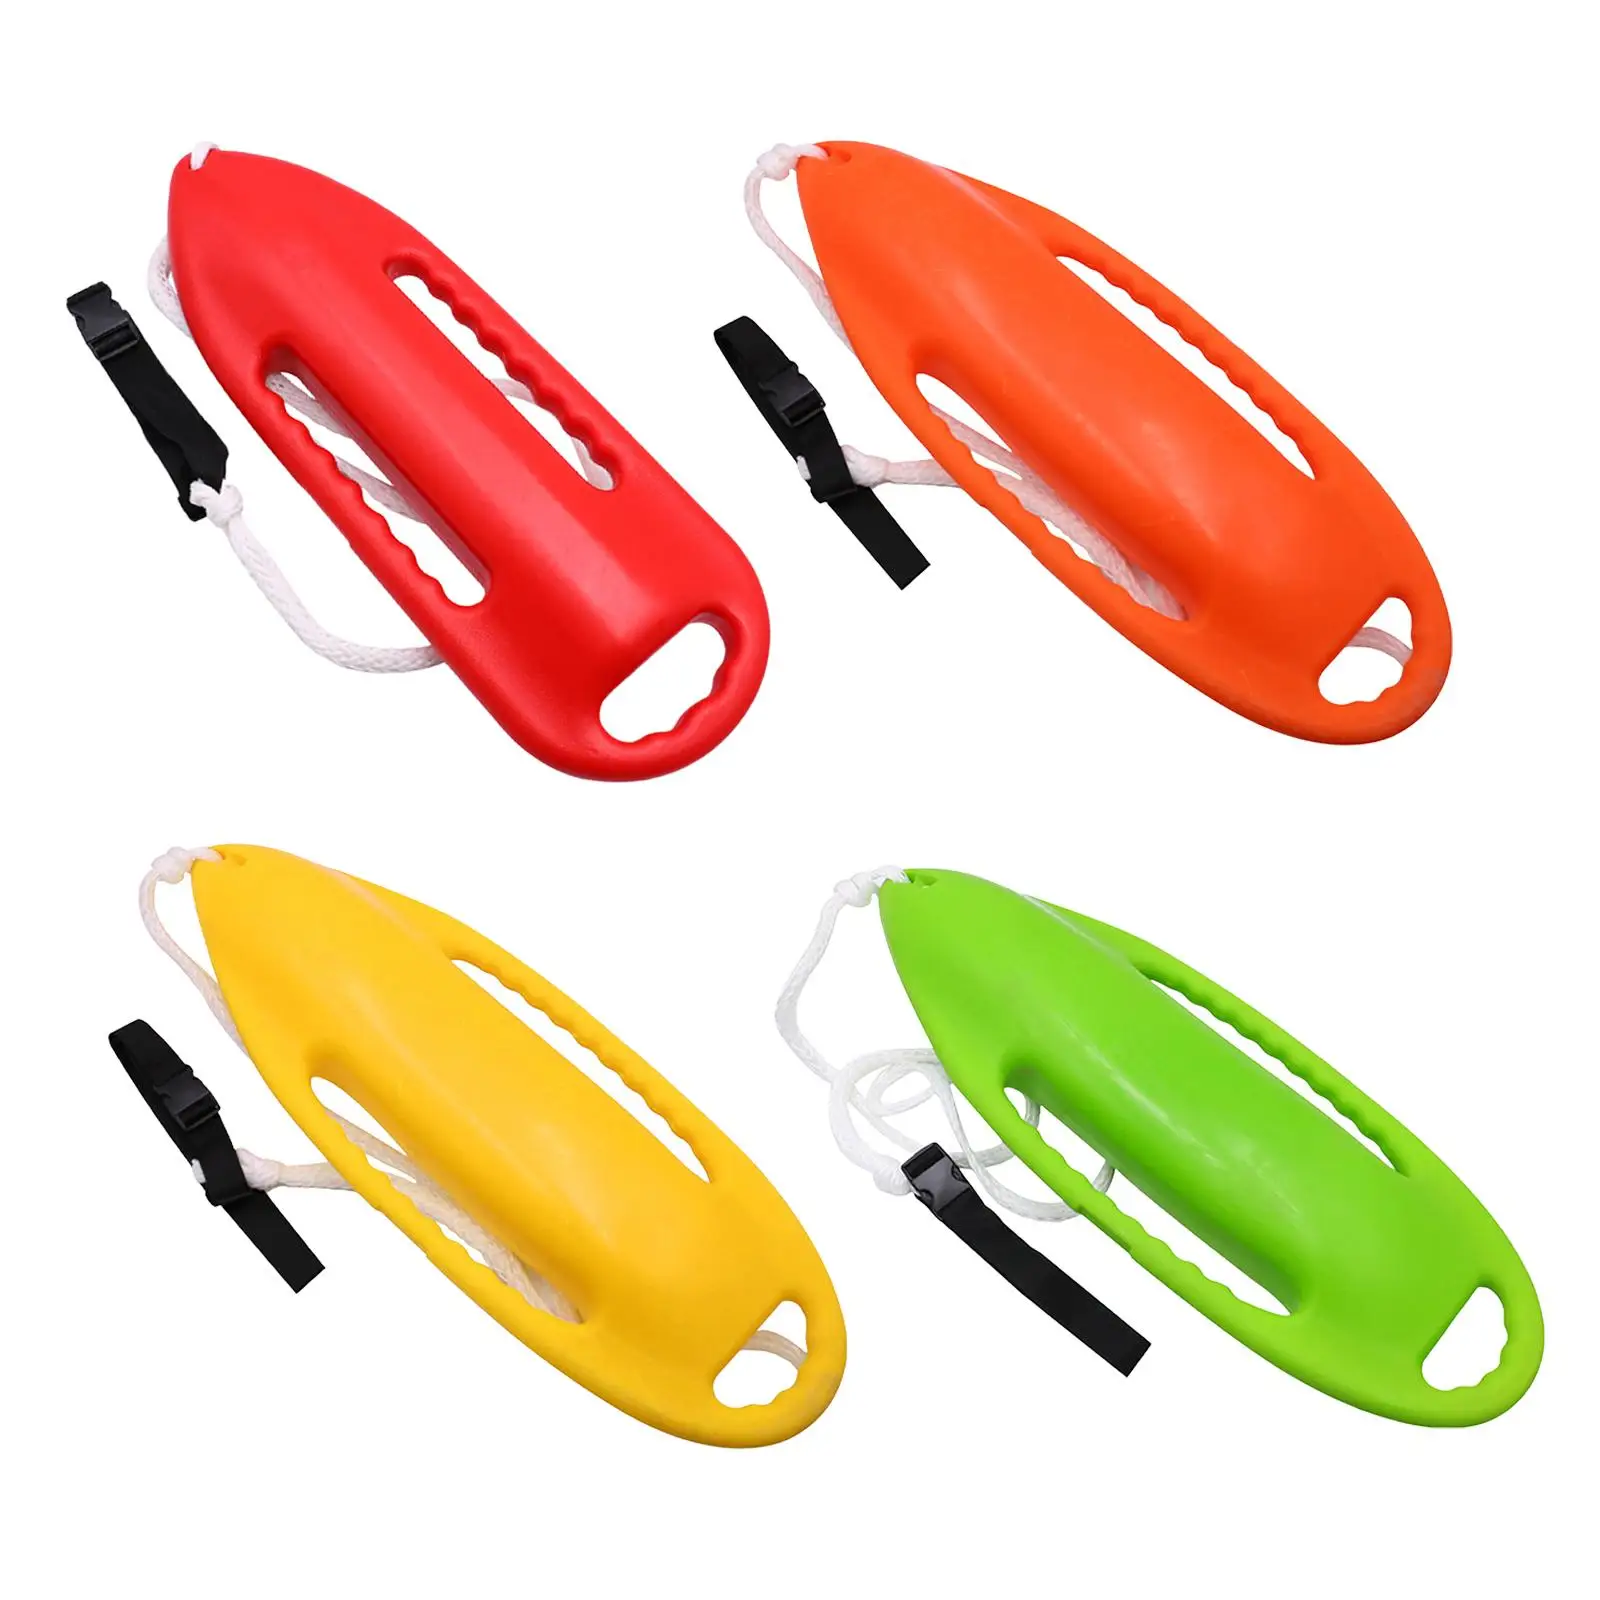 Rescue Can Floating Buoy Tube Swimming Equipment Free Inflatable with Adjustable Waist Belt